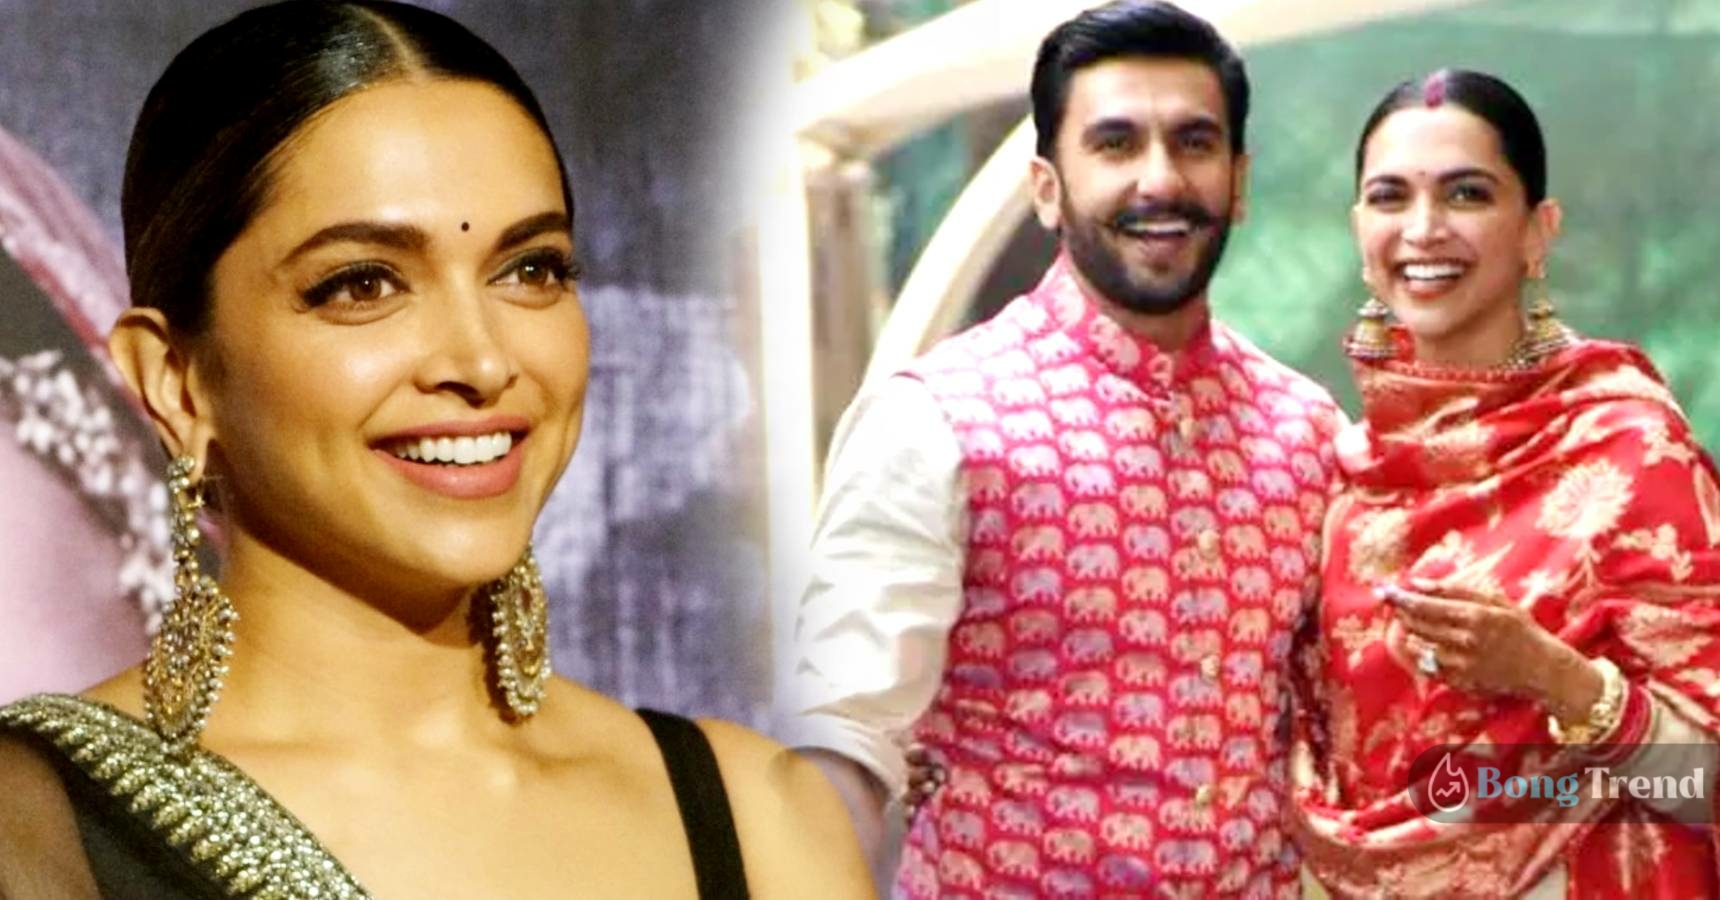 Ranveer Singh and Deepika Padukone will expect their first child soon, claims astrologer